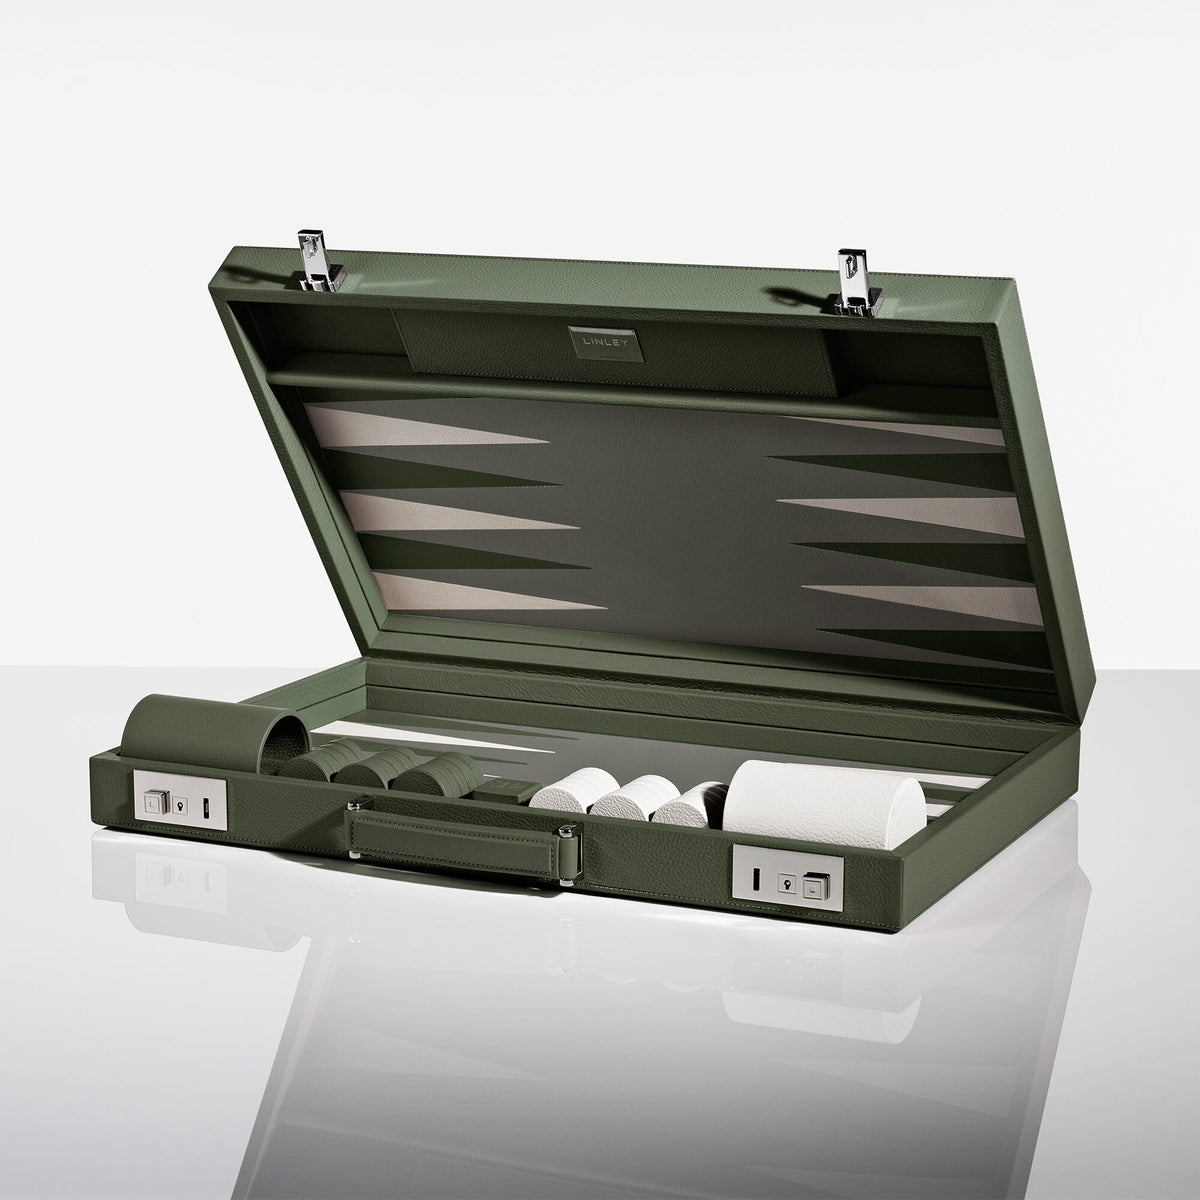 Mayfair Backgammon Case | Luxury Home Accessories & Gifts | LINLEY